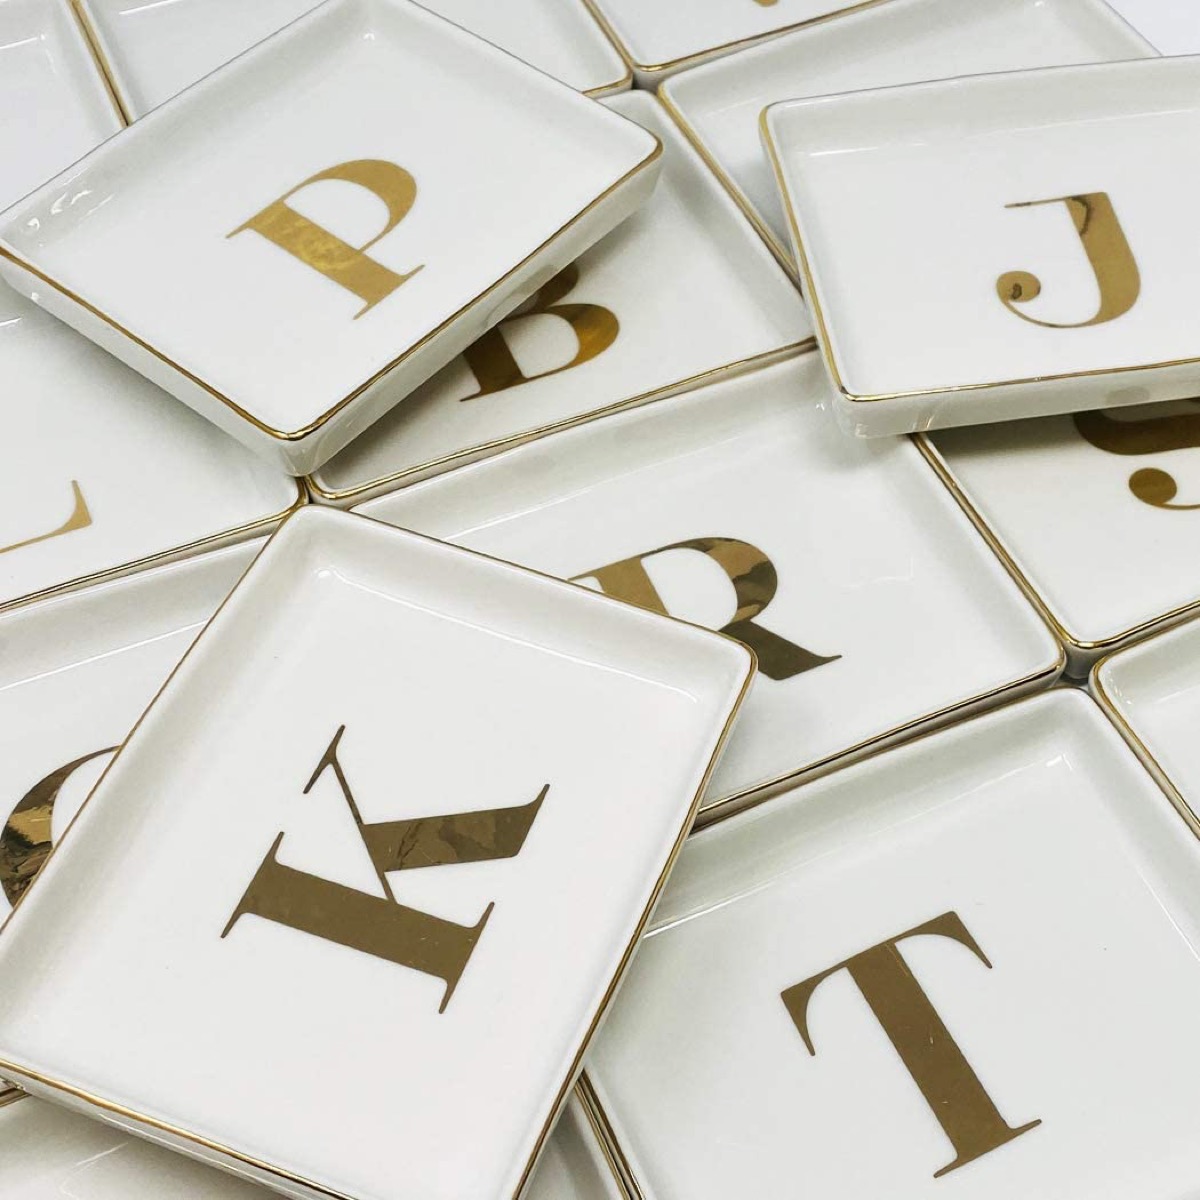 Pile of jewelry trays with initials